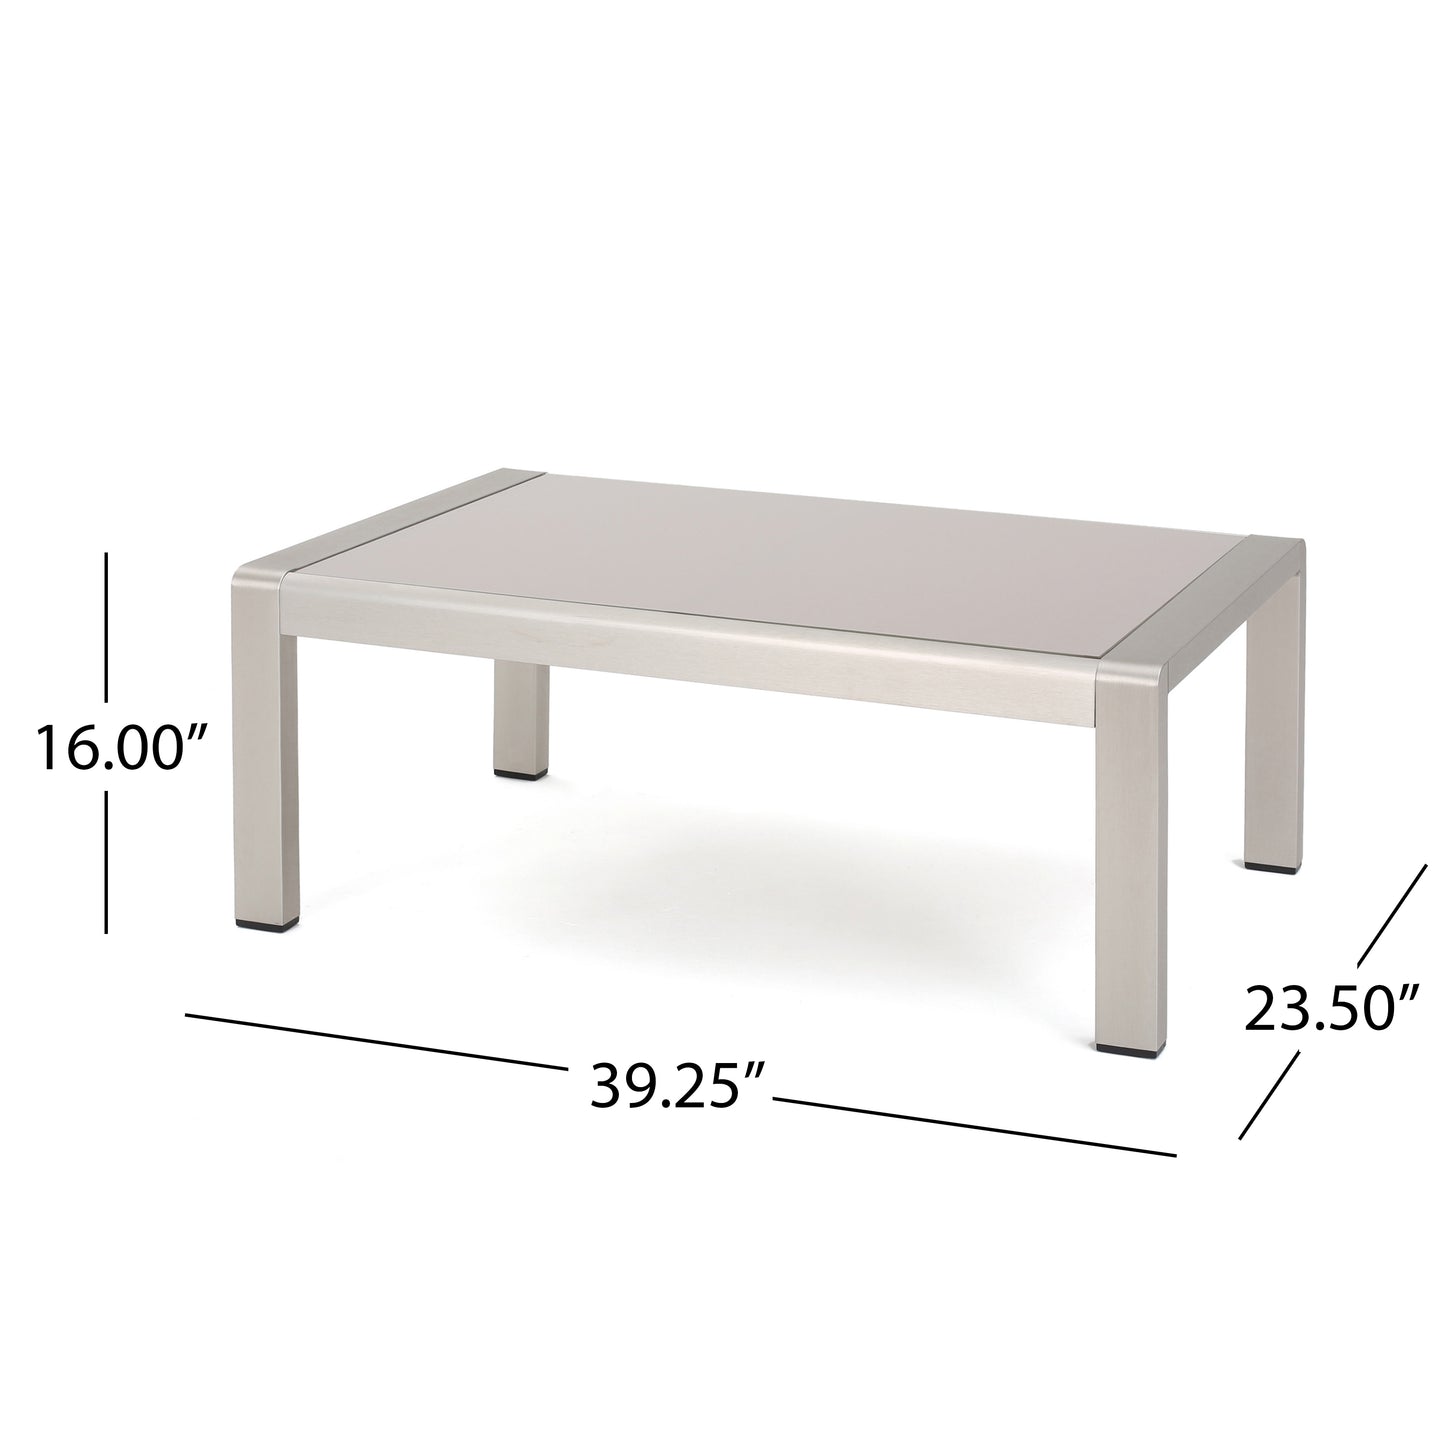 Booth Outdoor 4-Seater Aluminum Chat Set with Tempered Glass-Topped Coffee Table